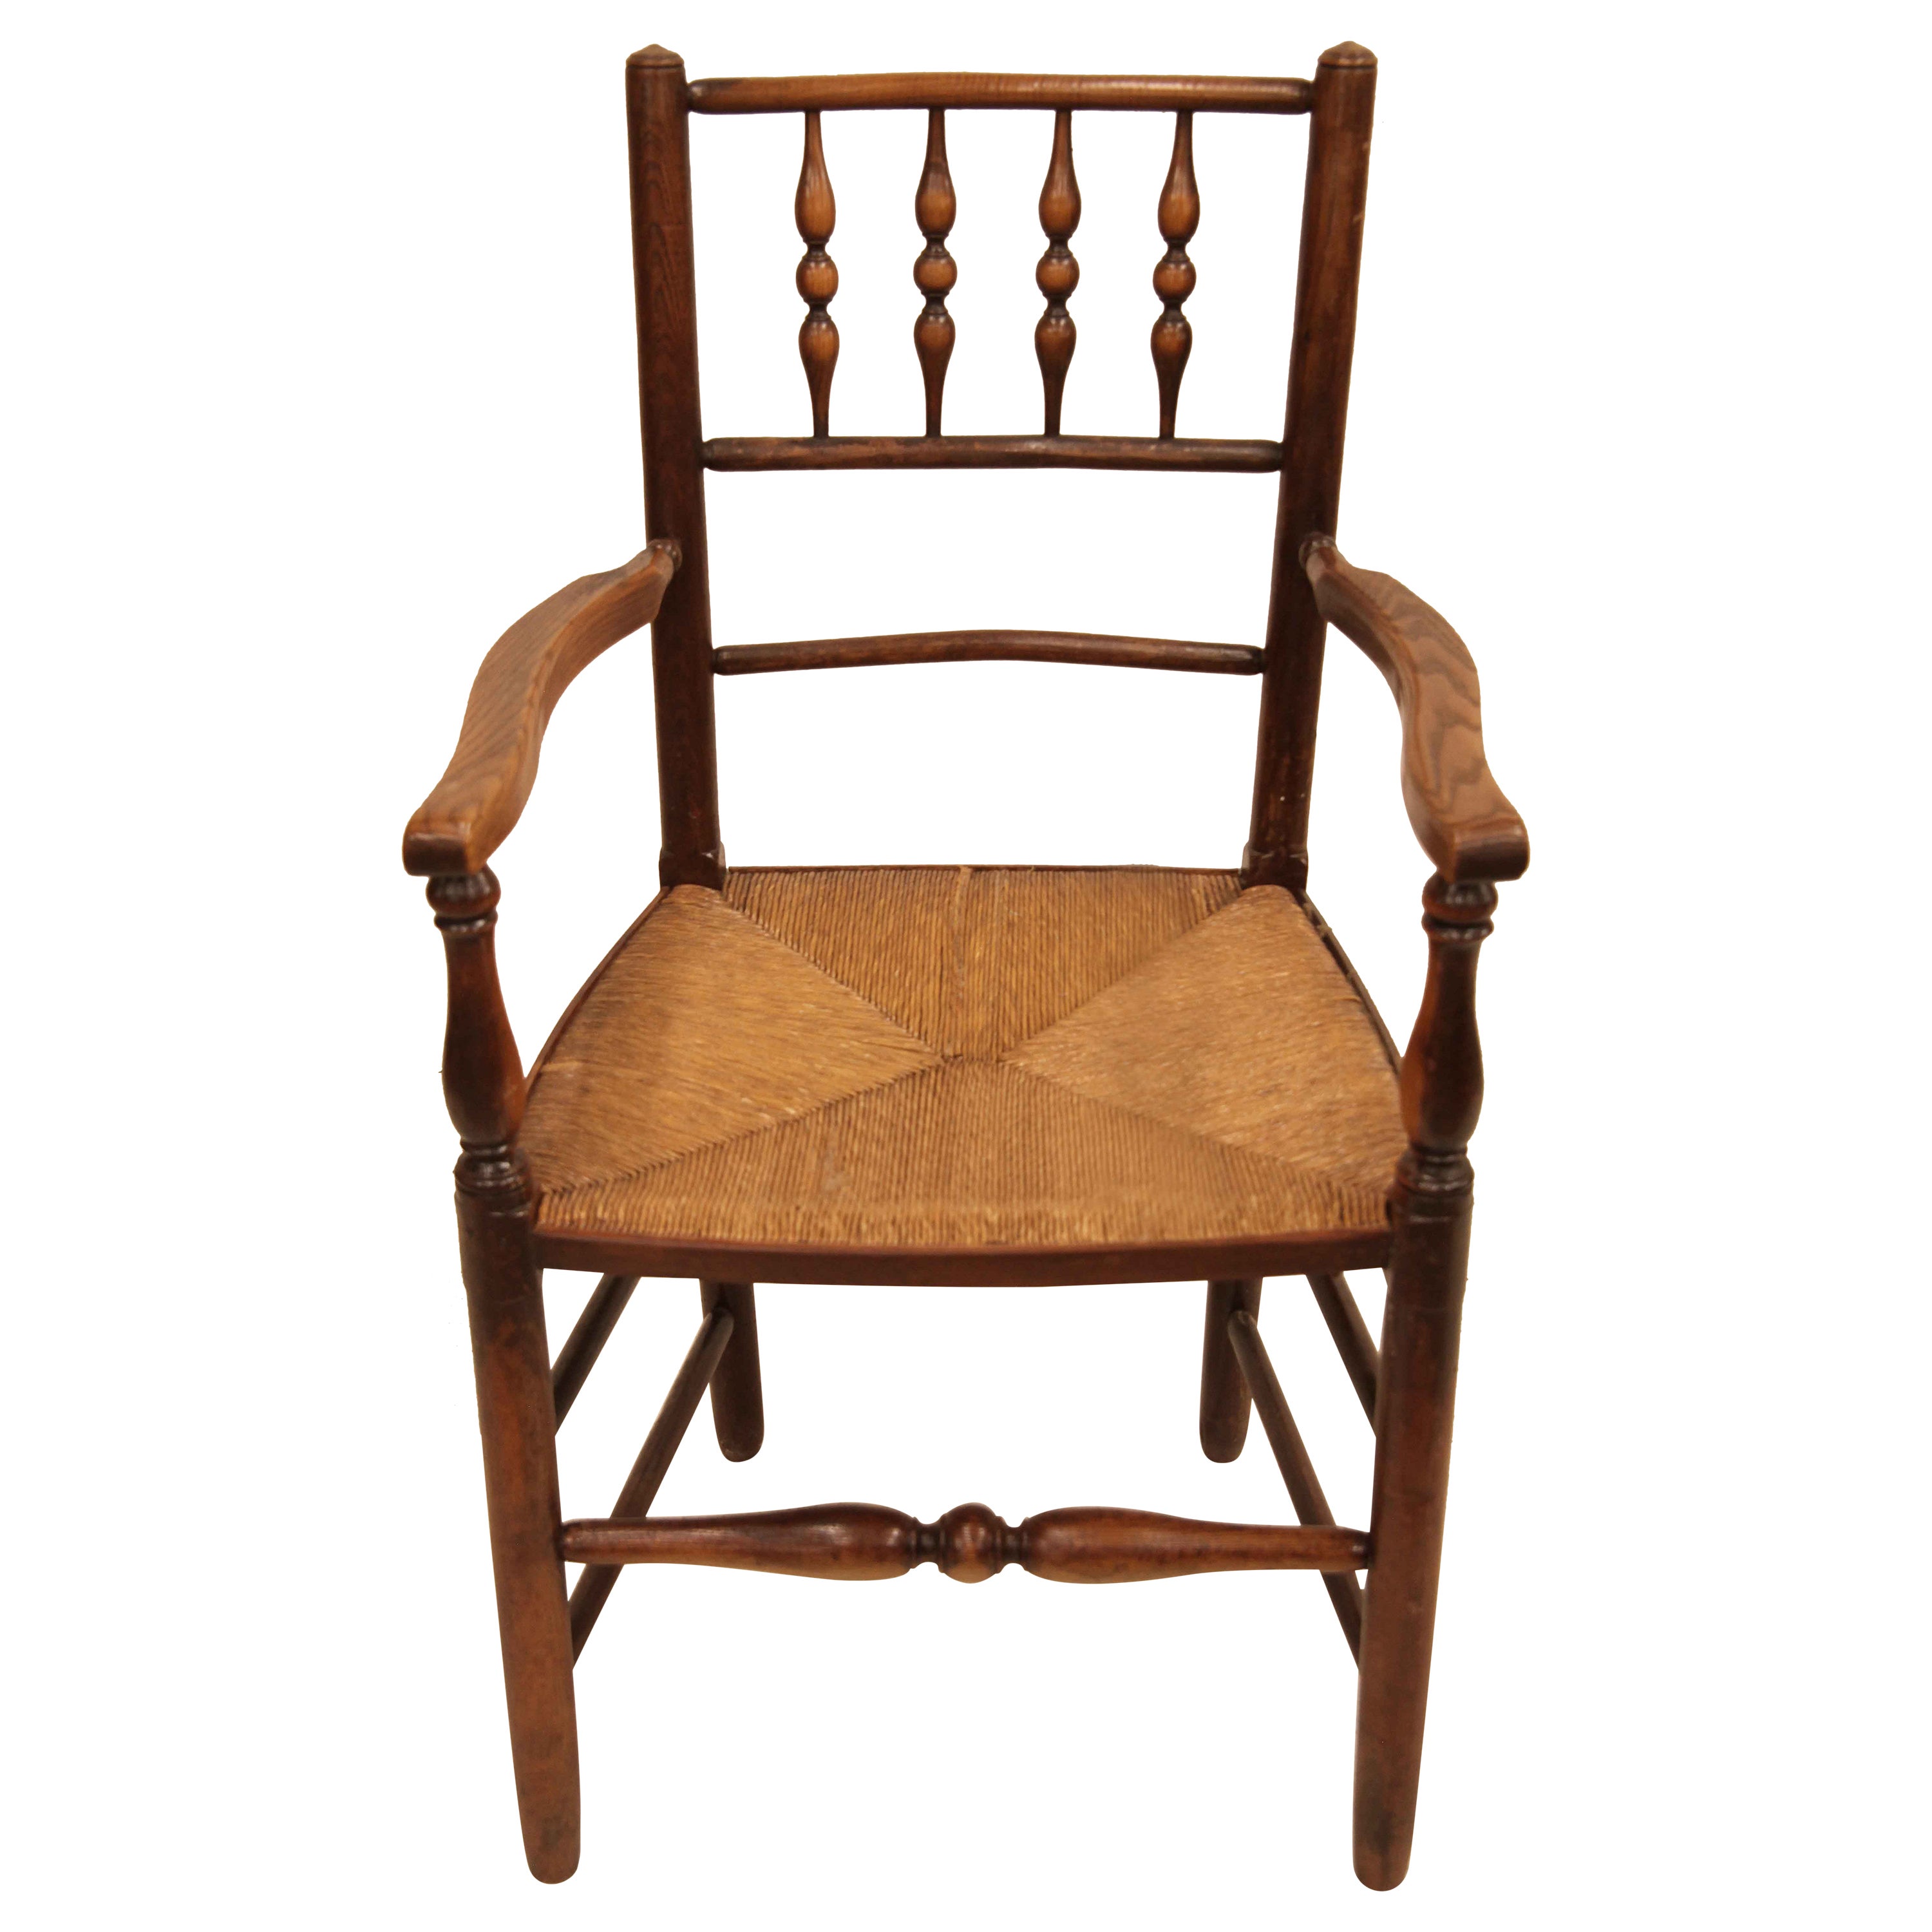 English Spindle Back Chair